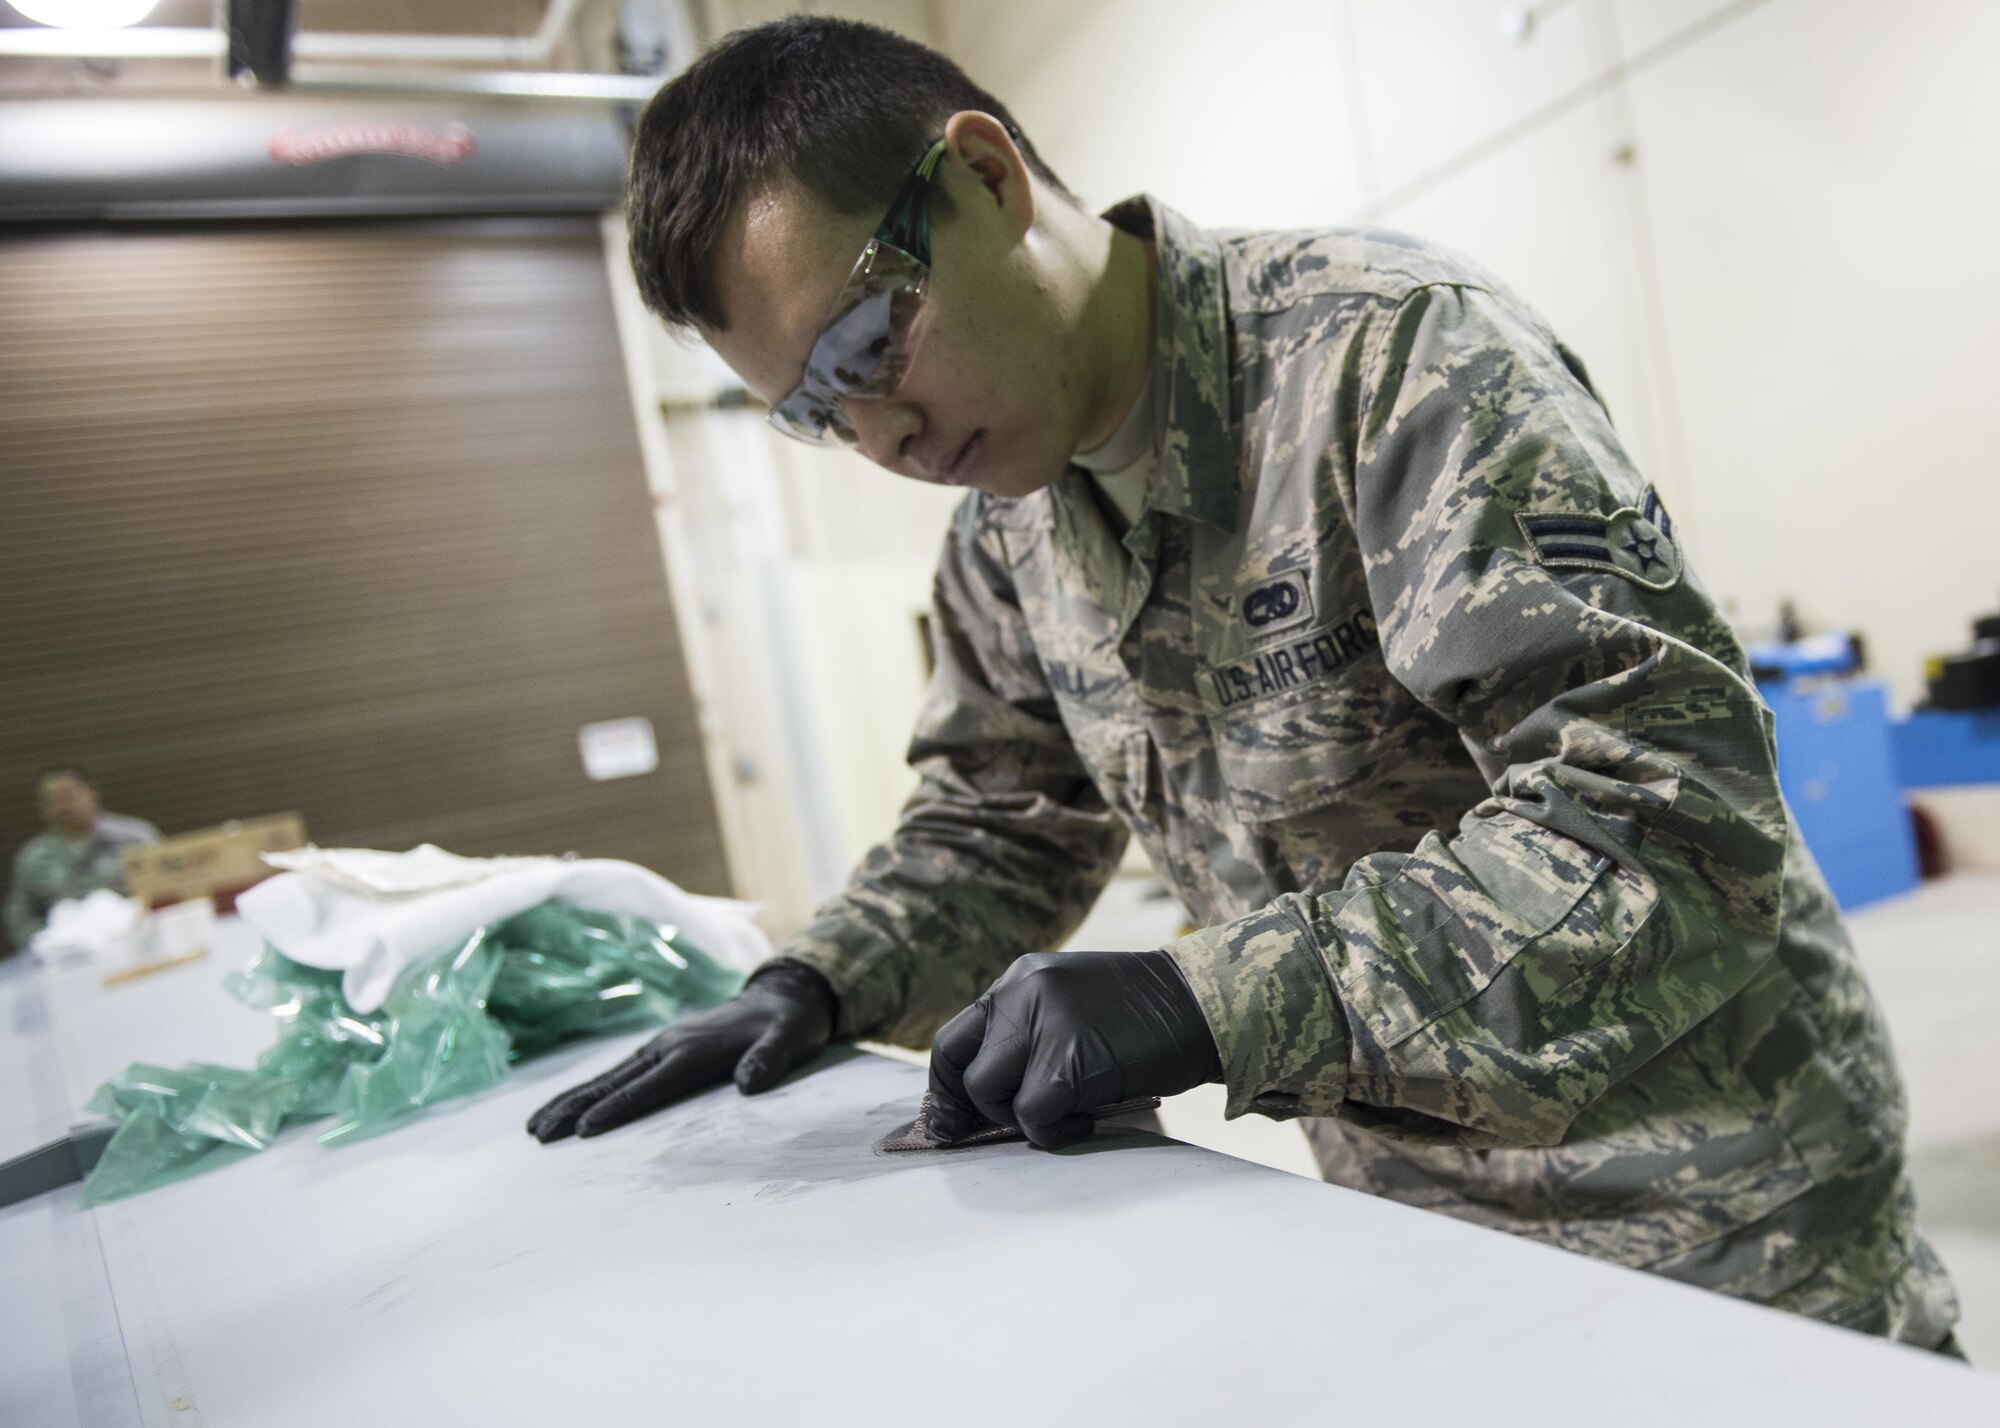 Airman 1st Class Nathaniel Avila, a 49th Maintenance Squadron aircraft structural maintenance technician, sands down a composite structural repair, Dec. 14, 2016, at Holloman Air Force Base, N.M. Structural maintenance technicians primarily do back shop repairs and flight line jobs for both F-16 Fighting Falcons and MQ-9 Reapers. They also re-manufacture parts that are no longer available for purchase. (U.S. Air Force photo by Senior Airman Emily Kenney)